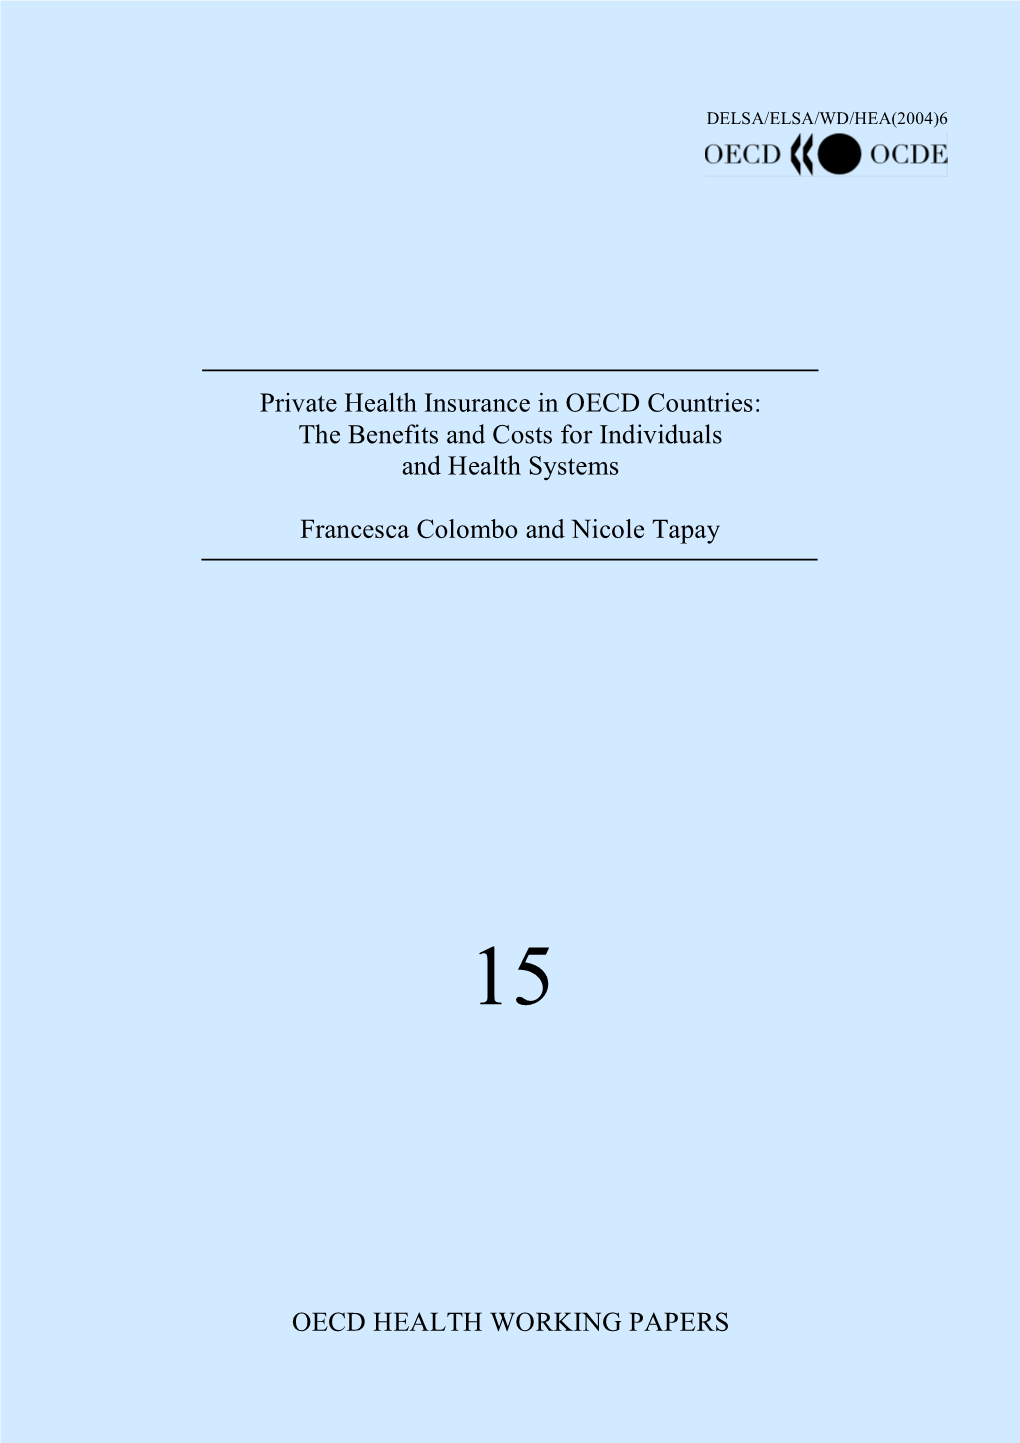 Private Health Insurance in OECD Countries: the Benefits and Costs for Individuals and Health Systems